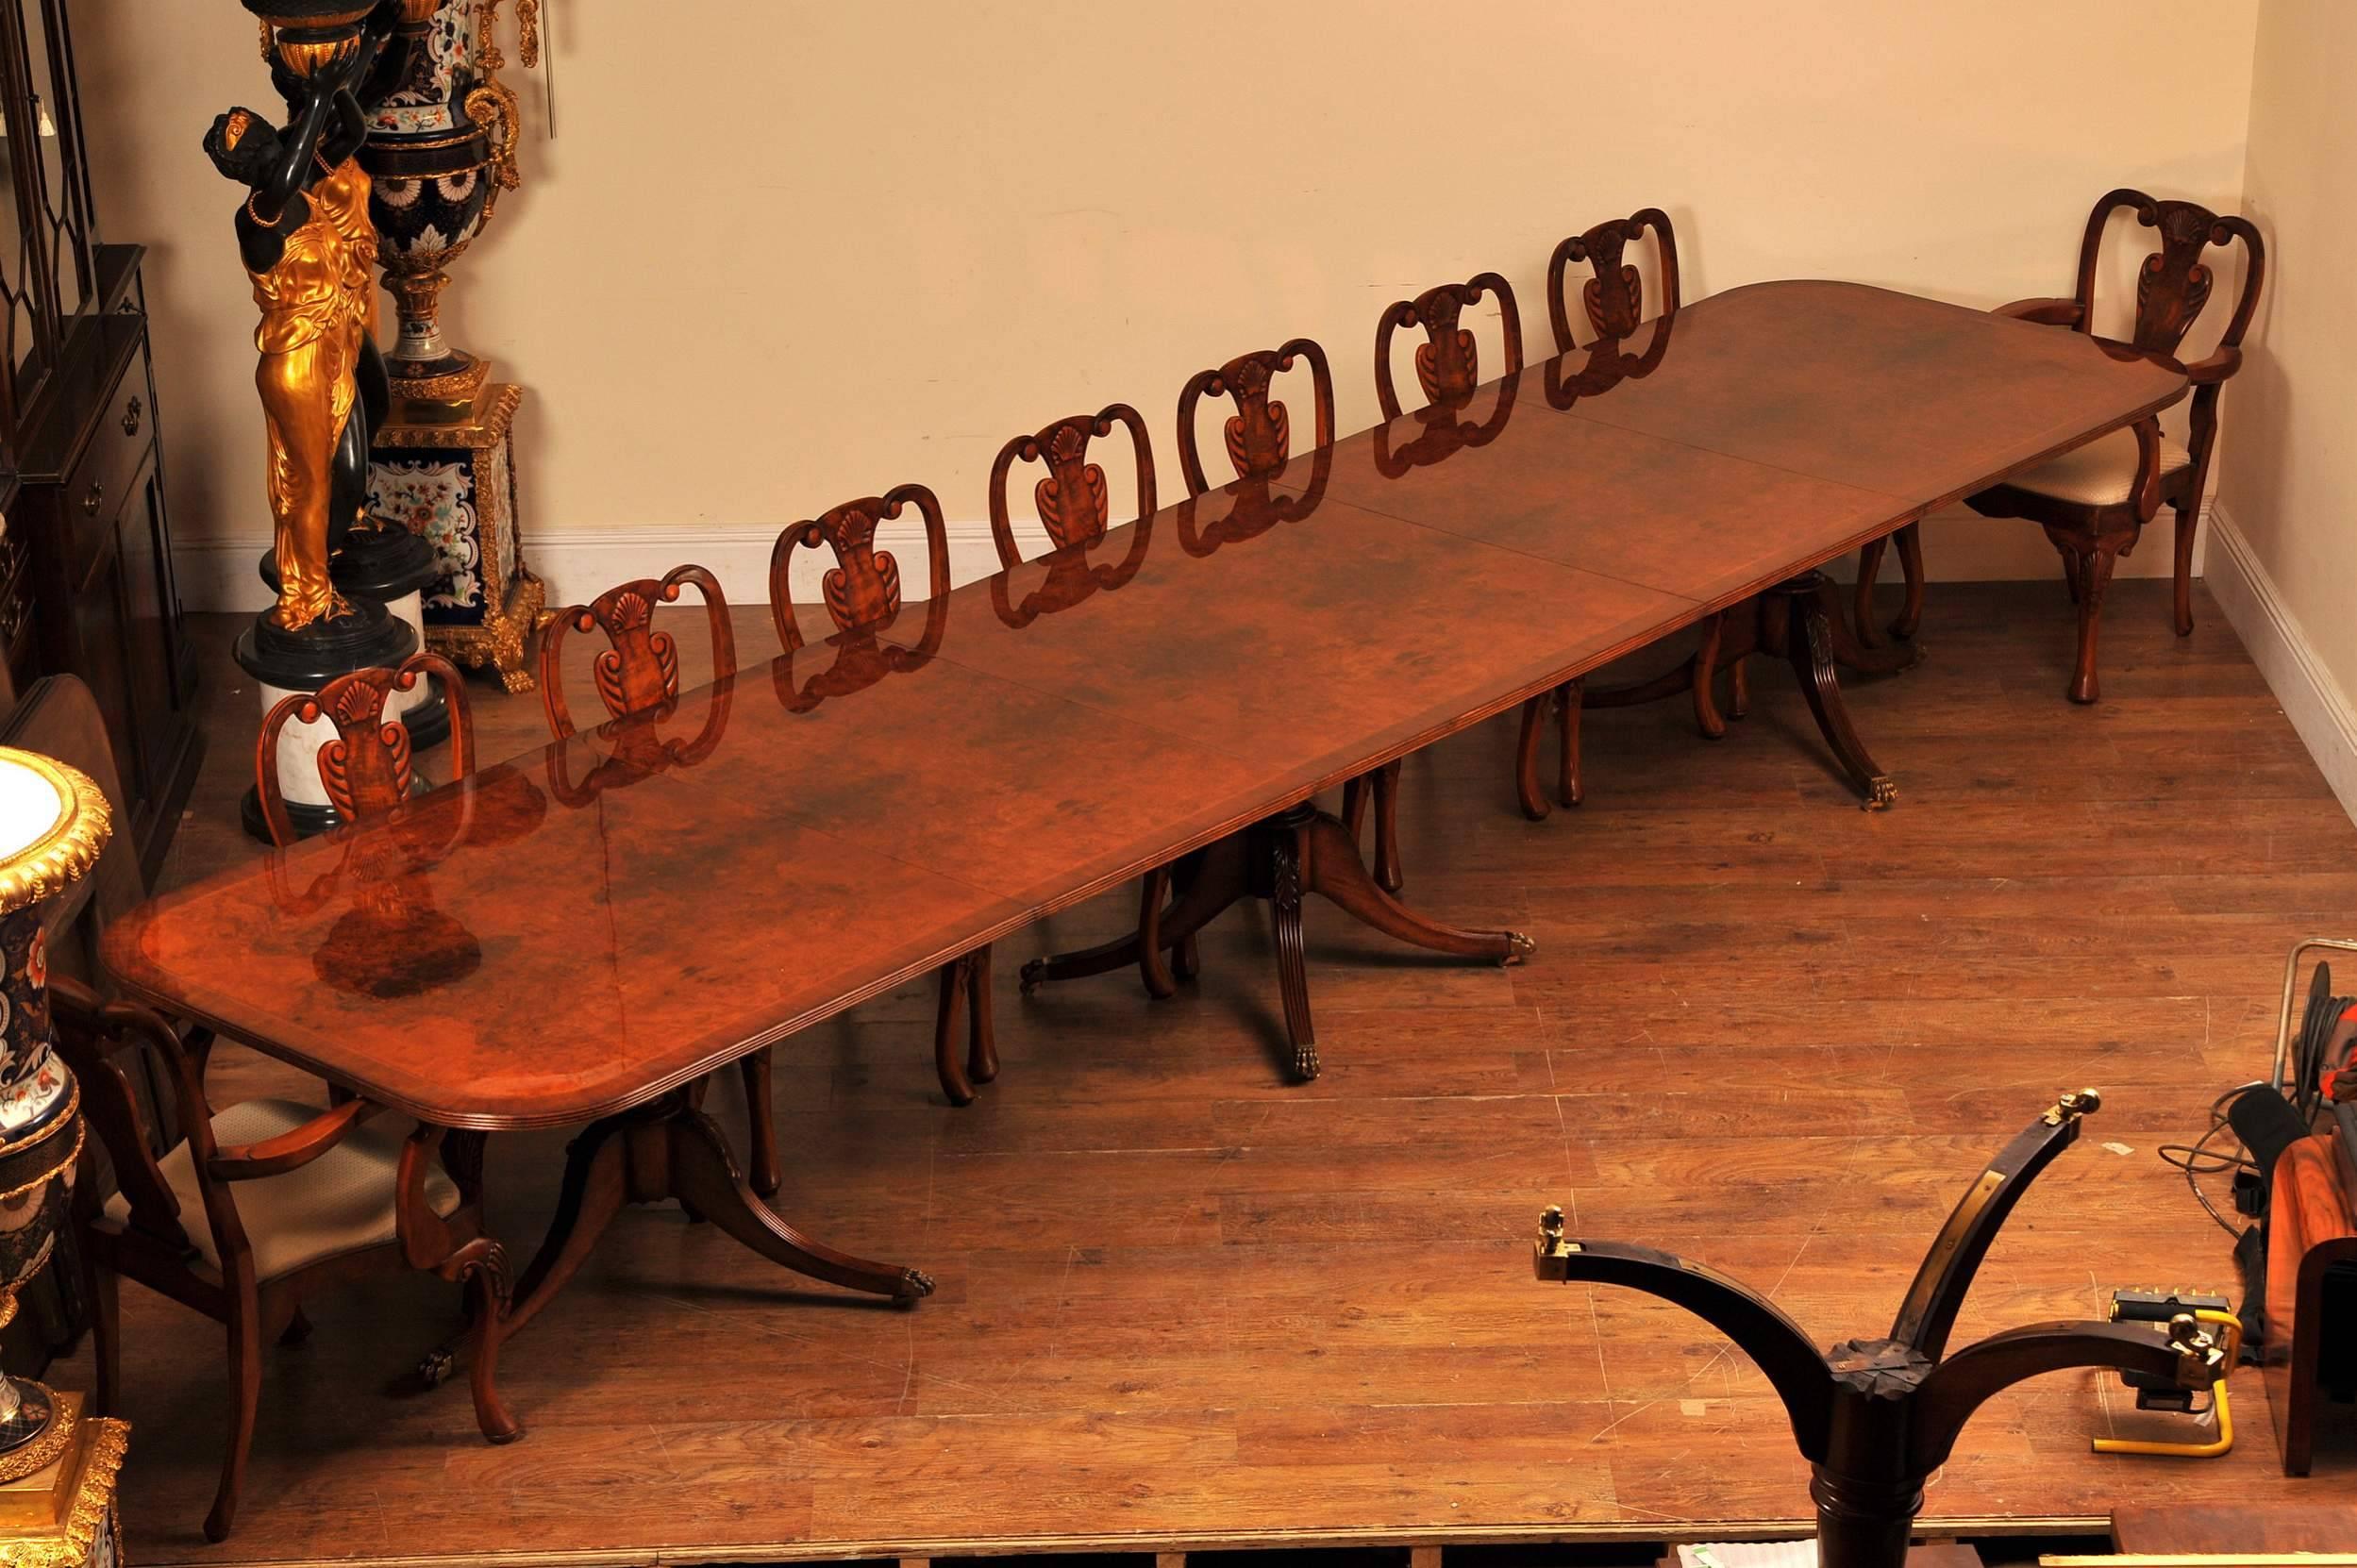 Come view this for yourself in our Hertfordshire warehouse.
Stunning English Regency style pedestal dining table in walnut.
Fully extended this goes to 16 feet - easily seats 18 people!
Perfect for large scale dinner parties or even executive